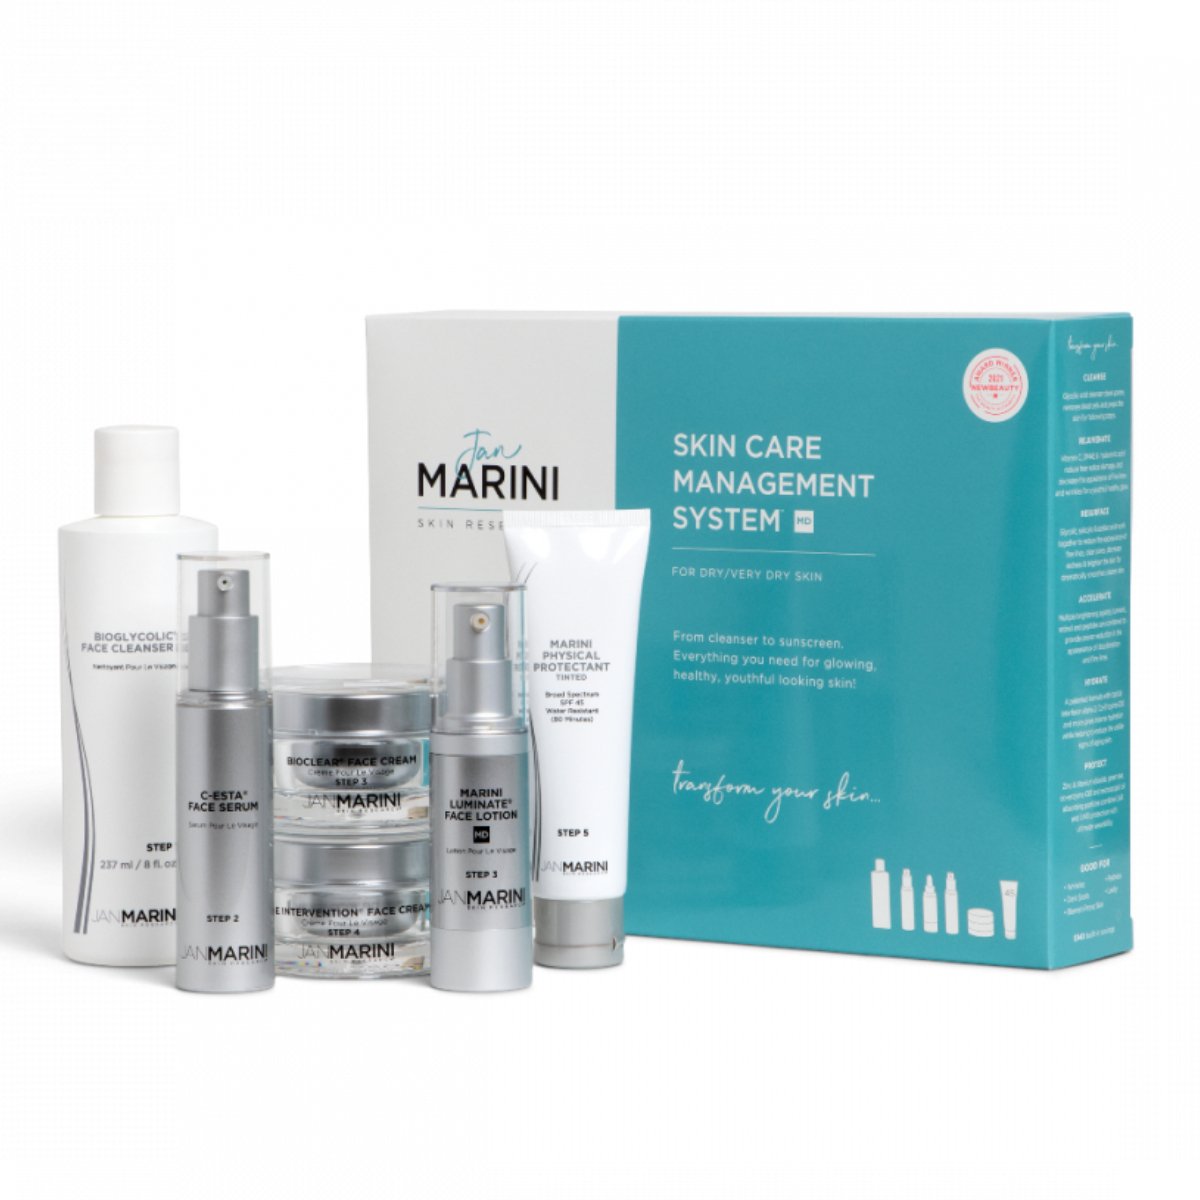 Jan Marini Skin Care Management System MD - Dry/Very Dry w/MPP SPF 45 Tinted - SkincareEssentials